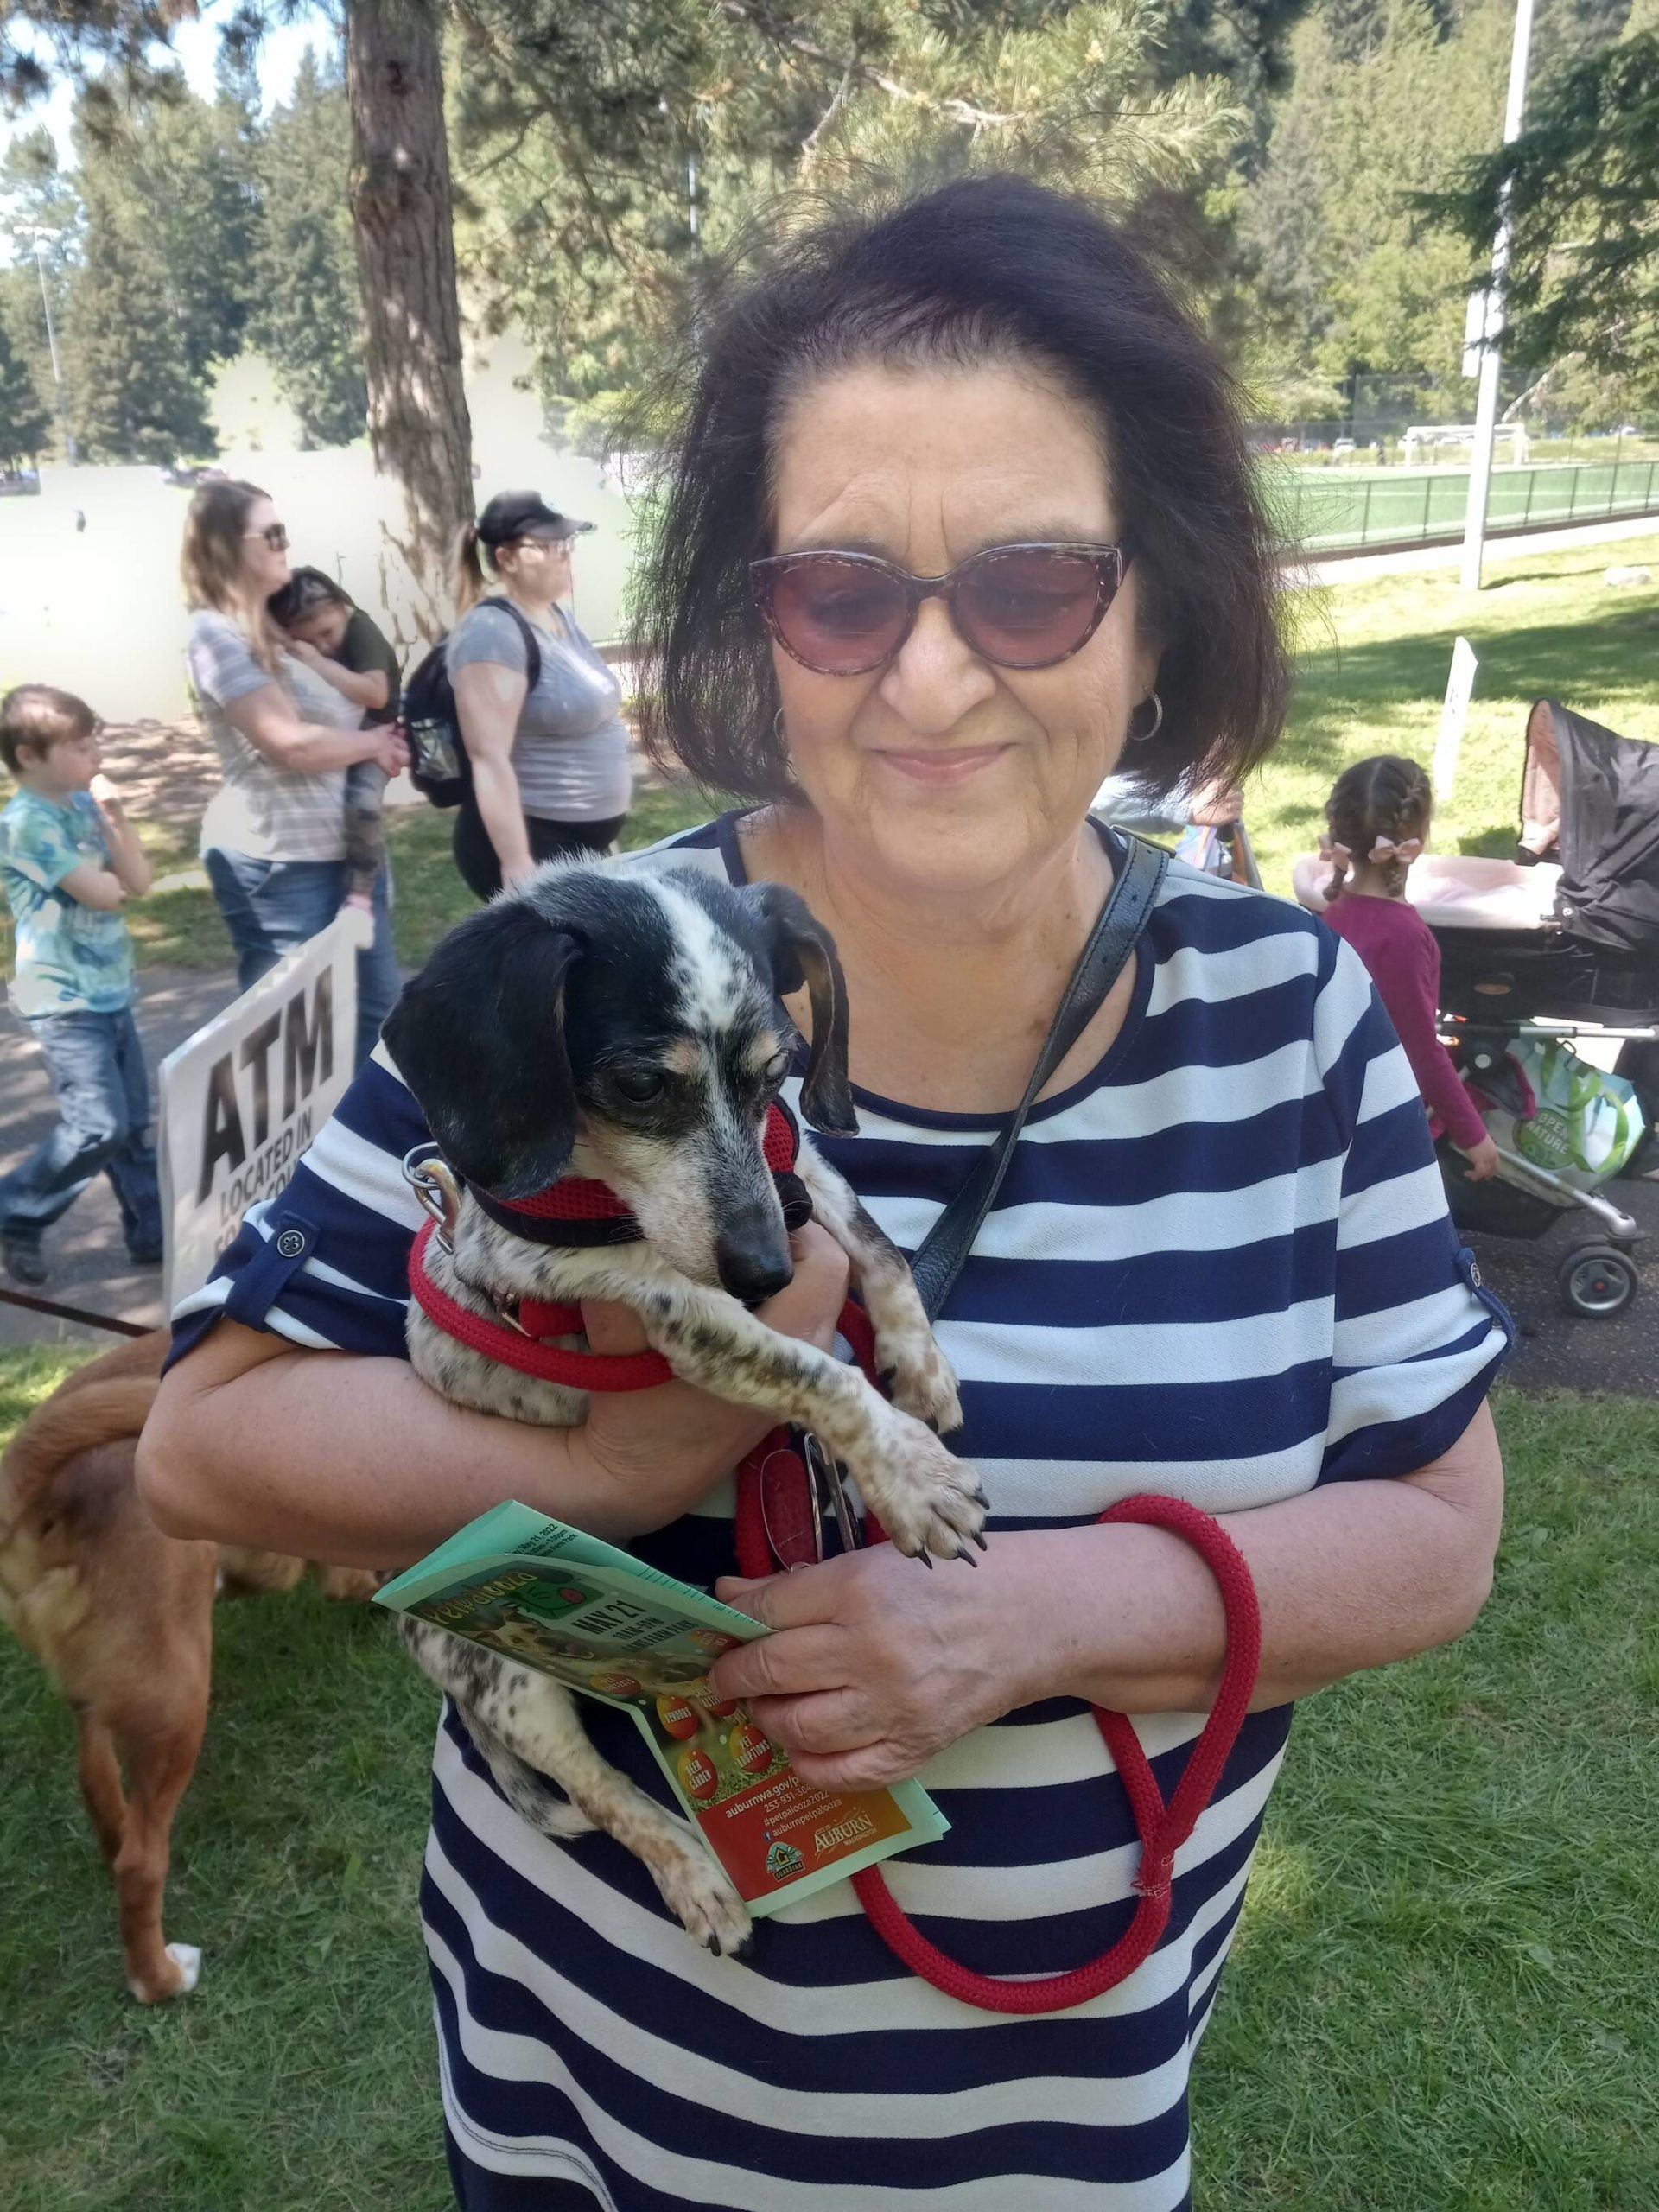 Photo by Robert Whale, Auburn Reporter
Sue Smith of Tacoma cradles her 13-year-old rat terrier at the Petpalooza event May 21 at Game Farm Park.